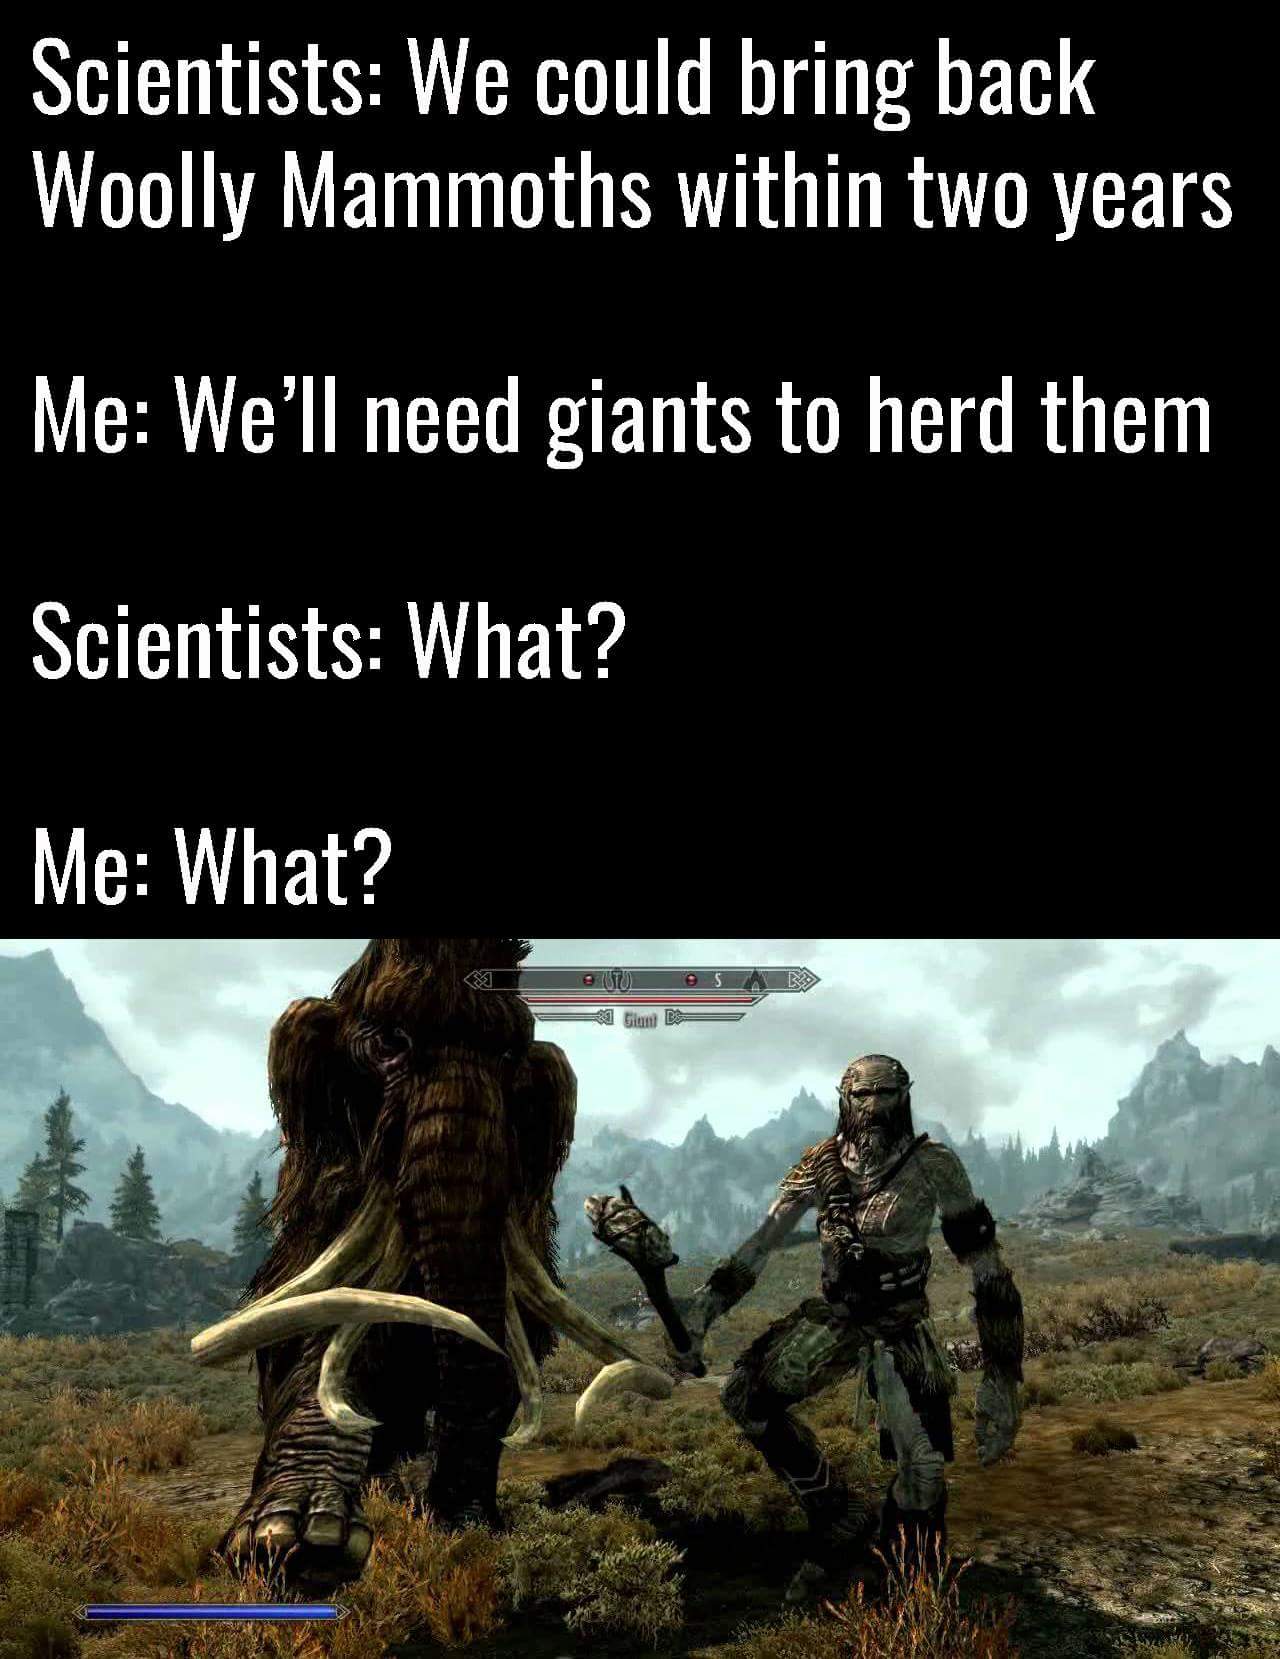 skyrim quest meme - Scientists We could bring back Woolly Mammoths within two years Me We'll need giants to herd them Scientists What? Me What?